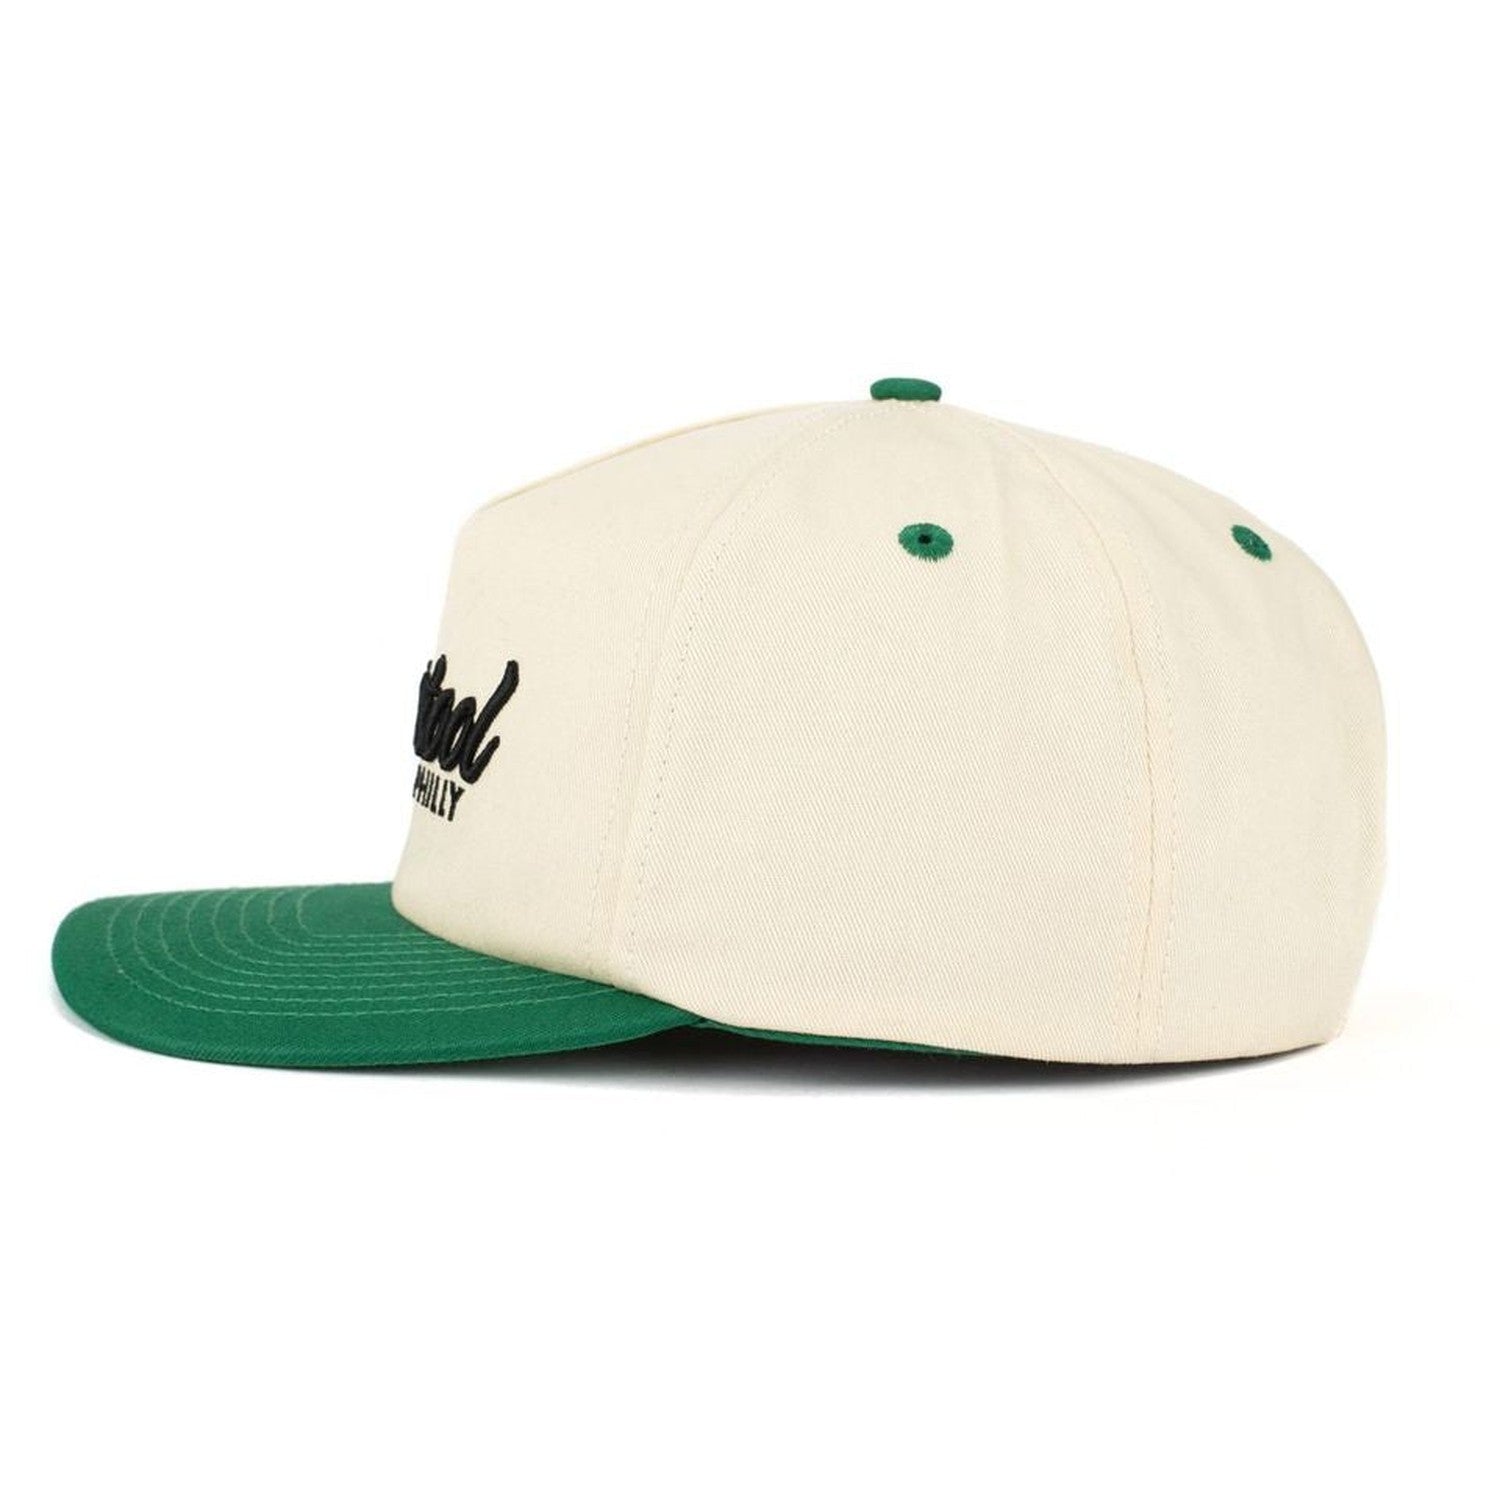 Hartford Whales White/Green Two Tone Plastic Snapback Adjustable Snap Back  Hat/Cap at  Men's Clothing store: Sports Fan Baseball Caps